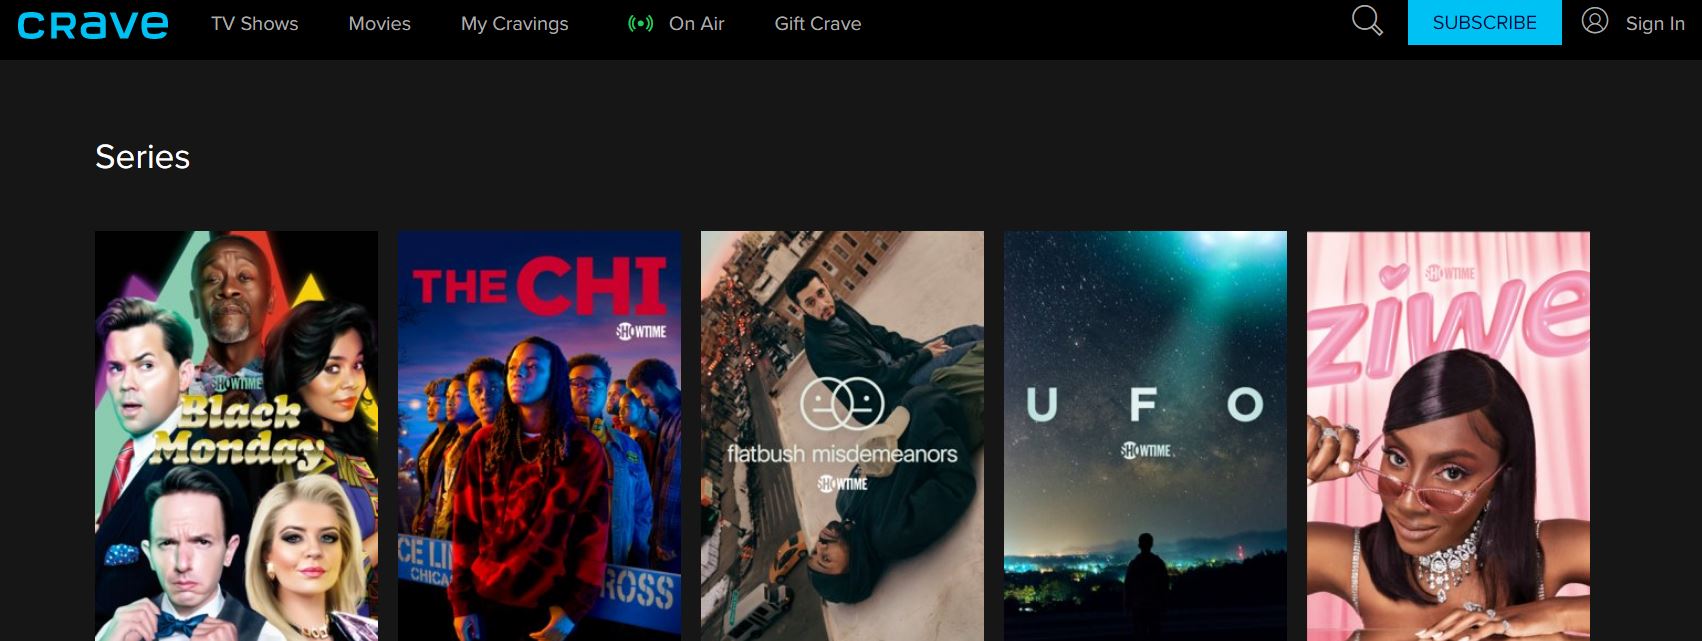 Crave Streaming movie website hd Alternatives Streaming Sites like Couchtuner